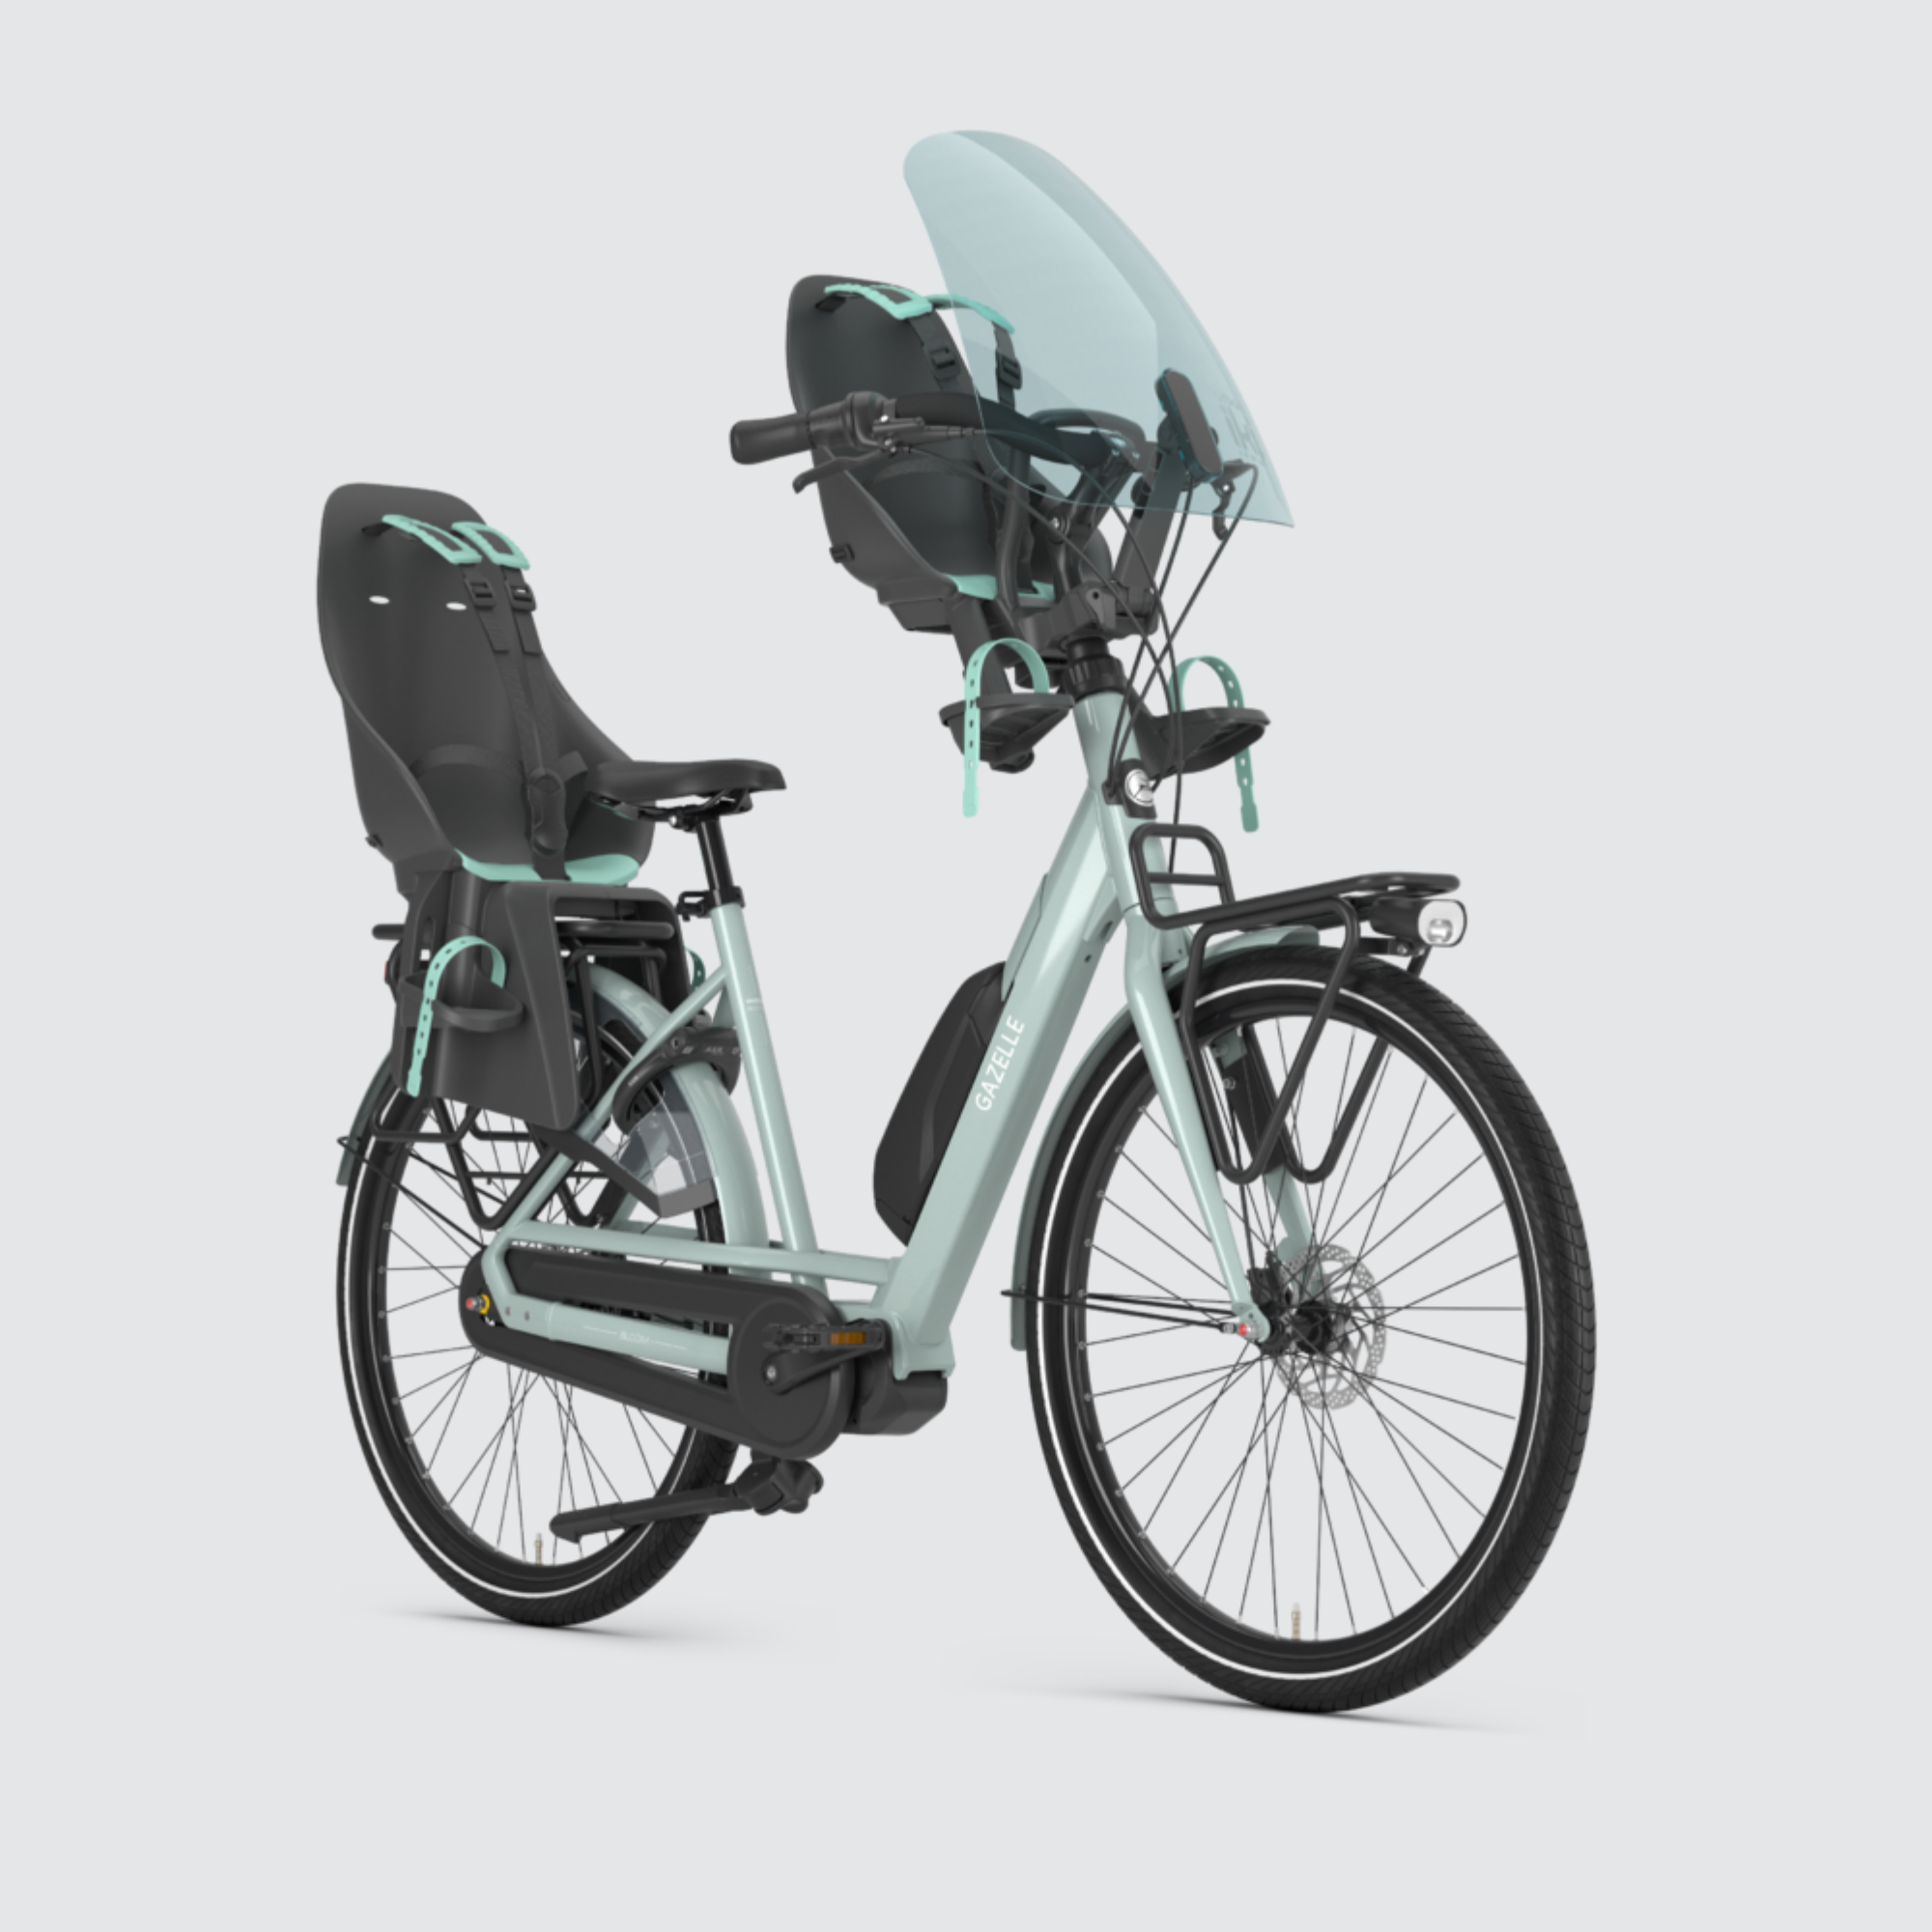 Explore the spacious design and stability of the Gazelle Bloom C7 HMS – your ideal family-friendly electric bike.  Bicycle shown with child seats in front and rear position with screen at the front. Child sseats and screen not included and must be purchased separately. 